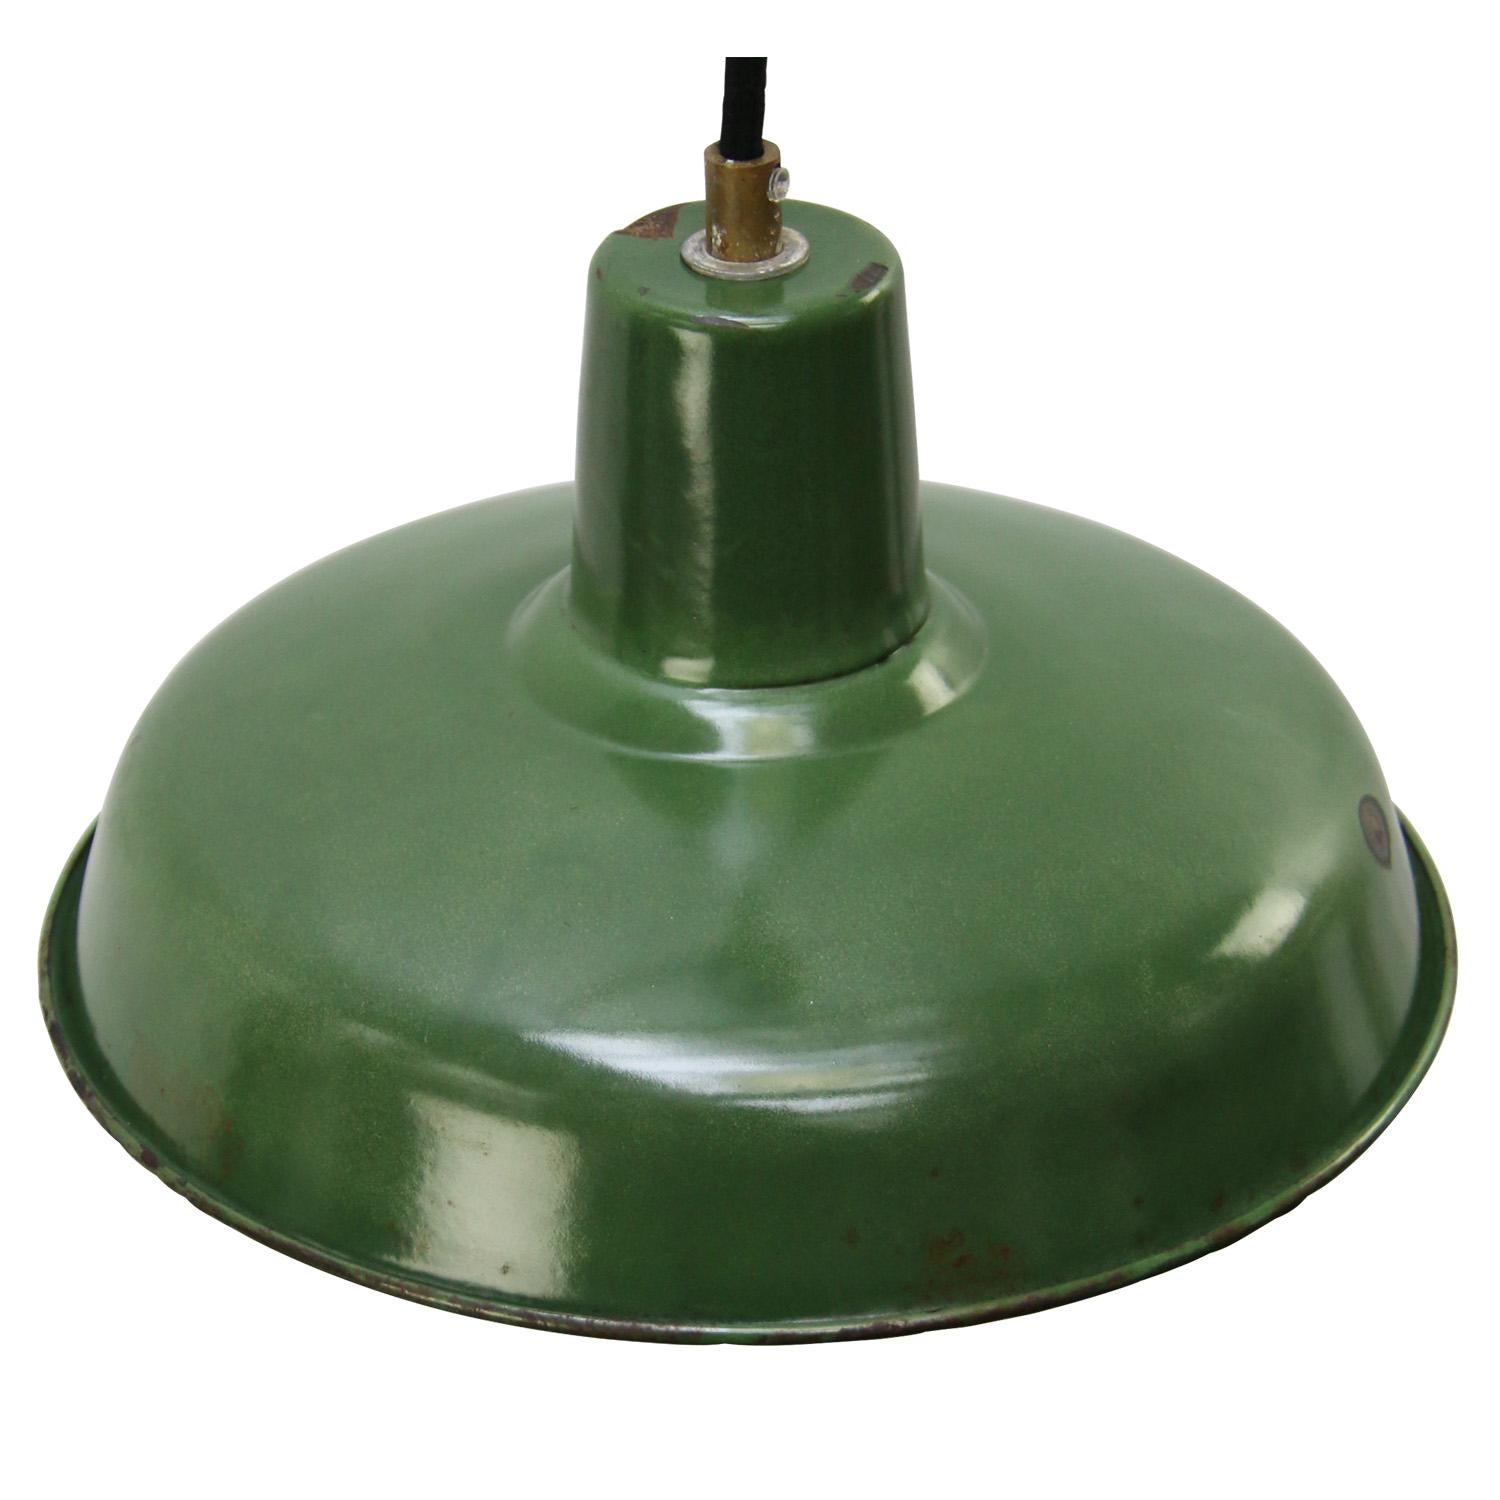 Small French factory pendant light
Green enamel, white interior

Weight: 1.00 kg / 2.2 lb

Priced per individual item. All lamps have been made suitable by international standards for incandescent light bulbs, energy-efficient and LED bulbs.